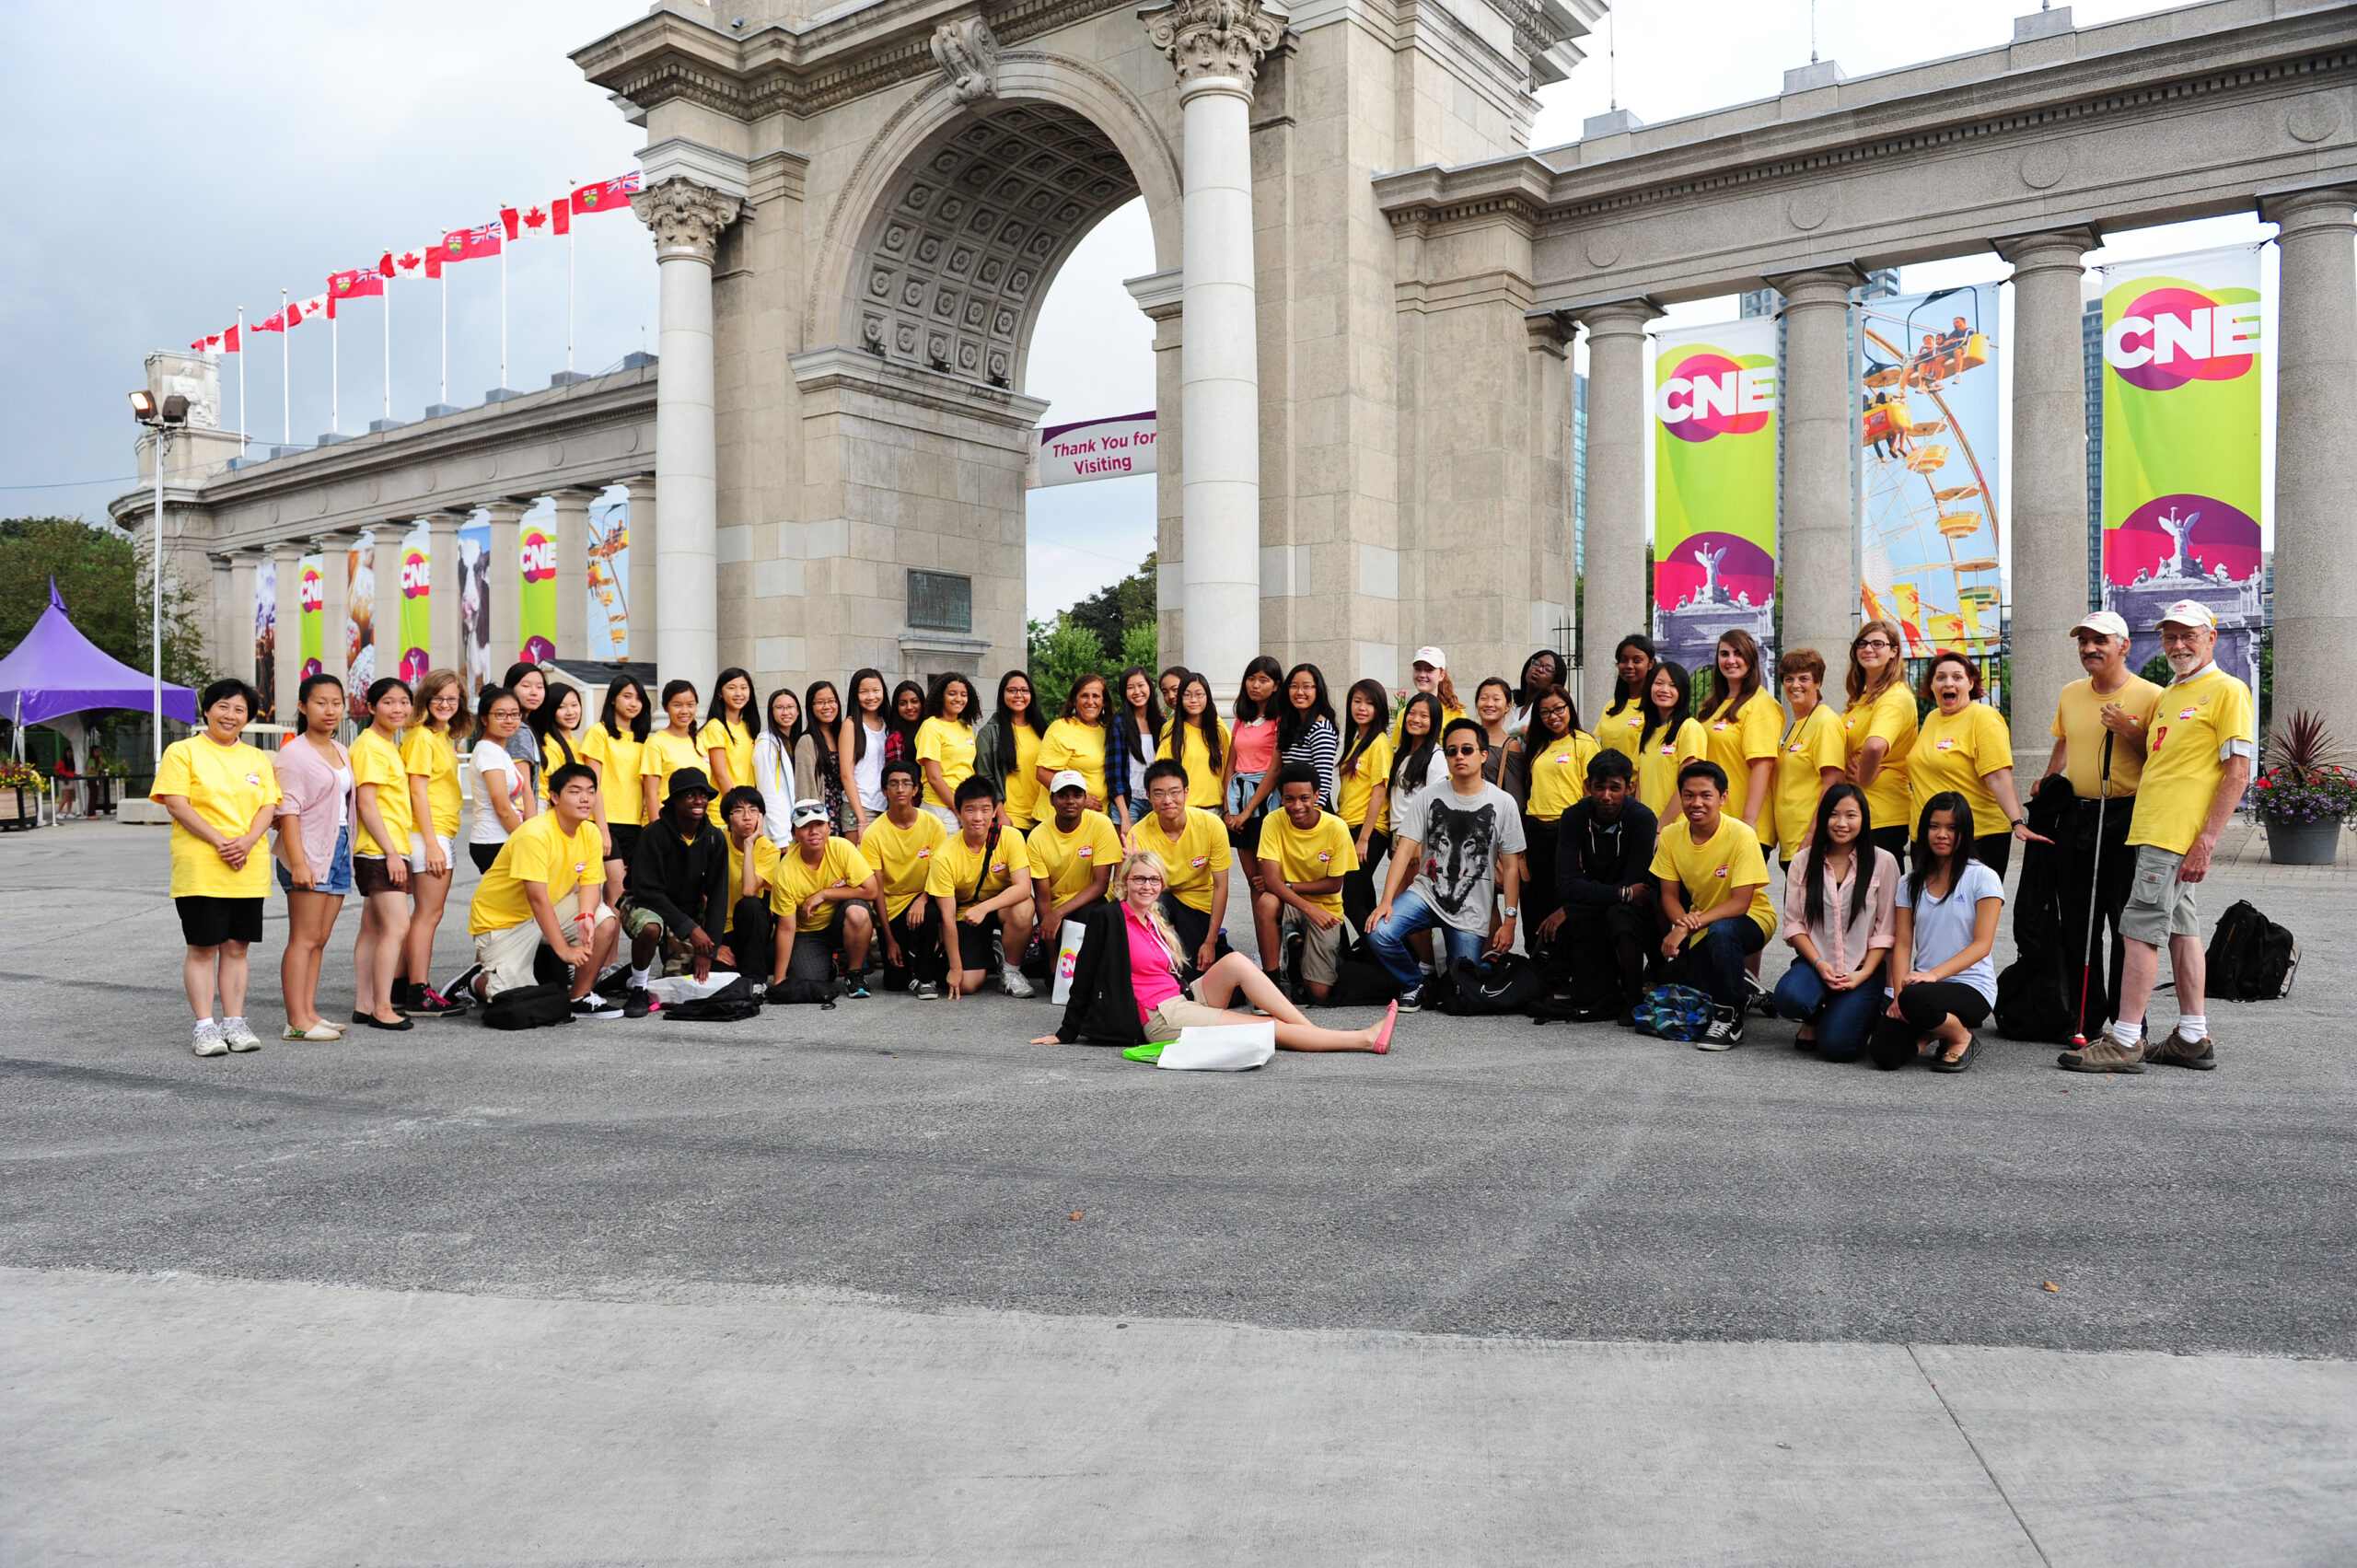 CNE gates with large group of volunteers in front of gates